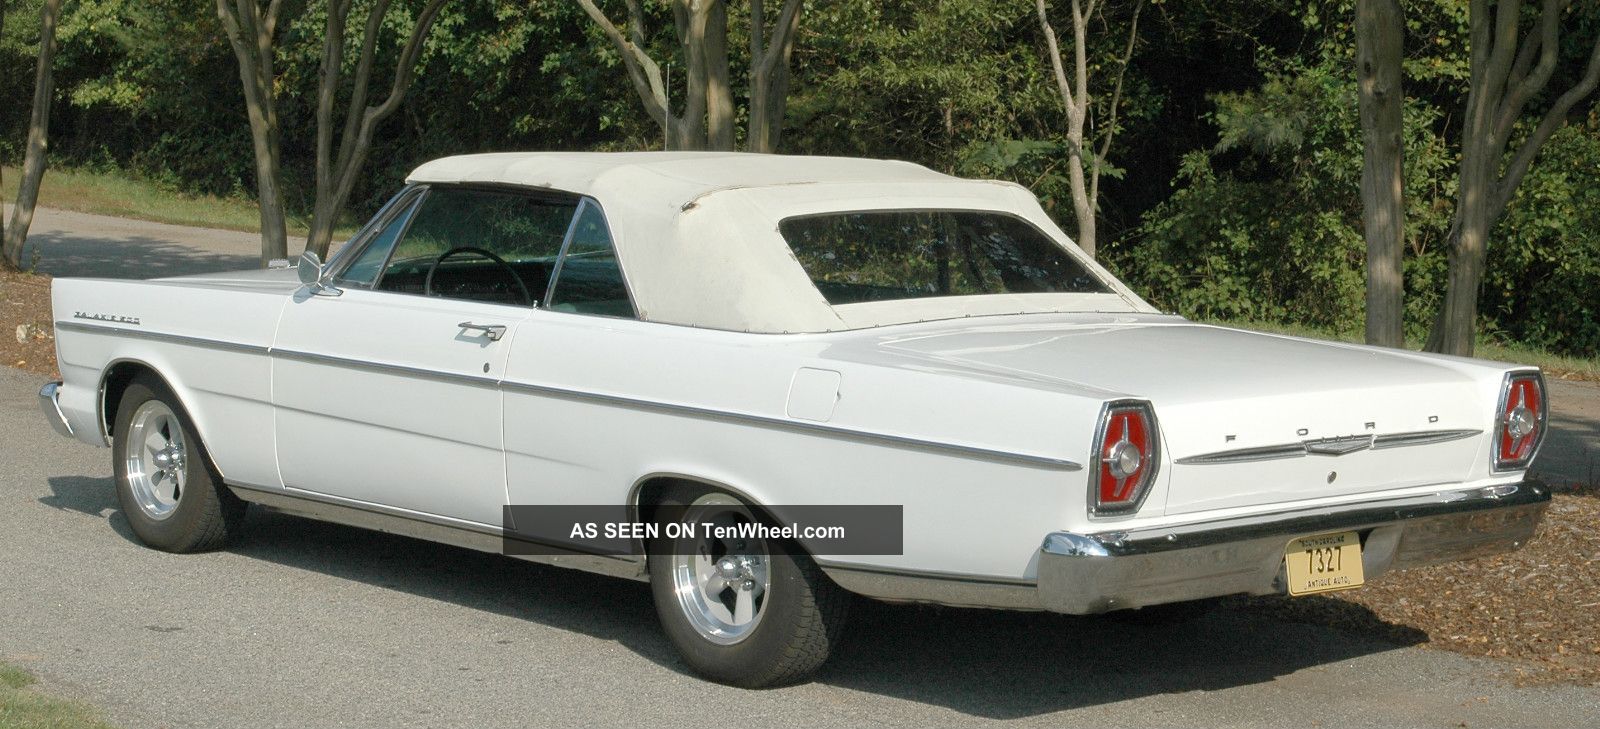 1965 Ford galaxie owners manual #1